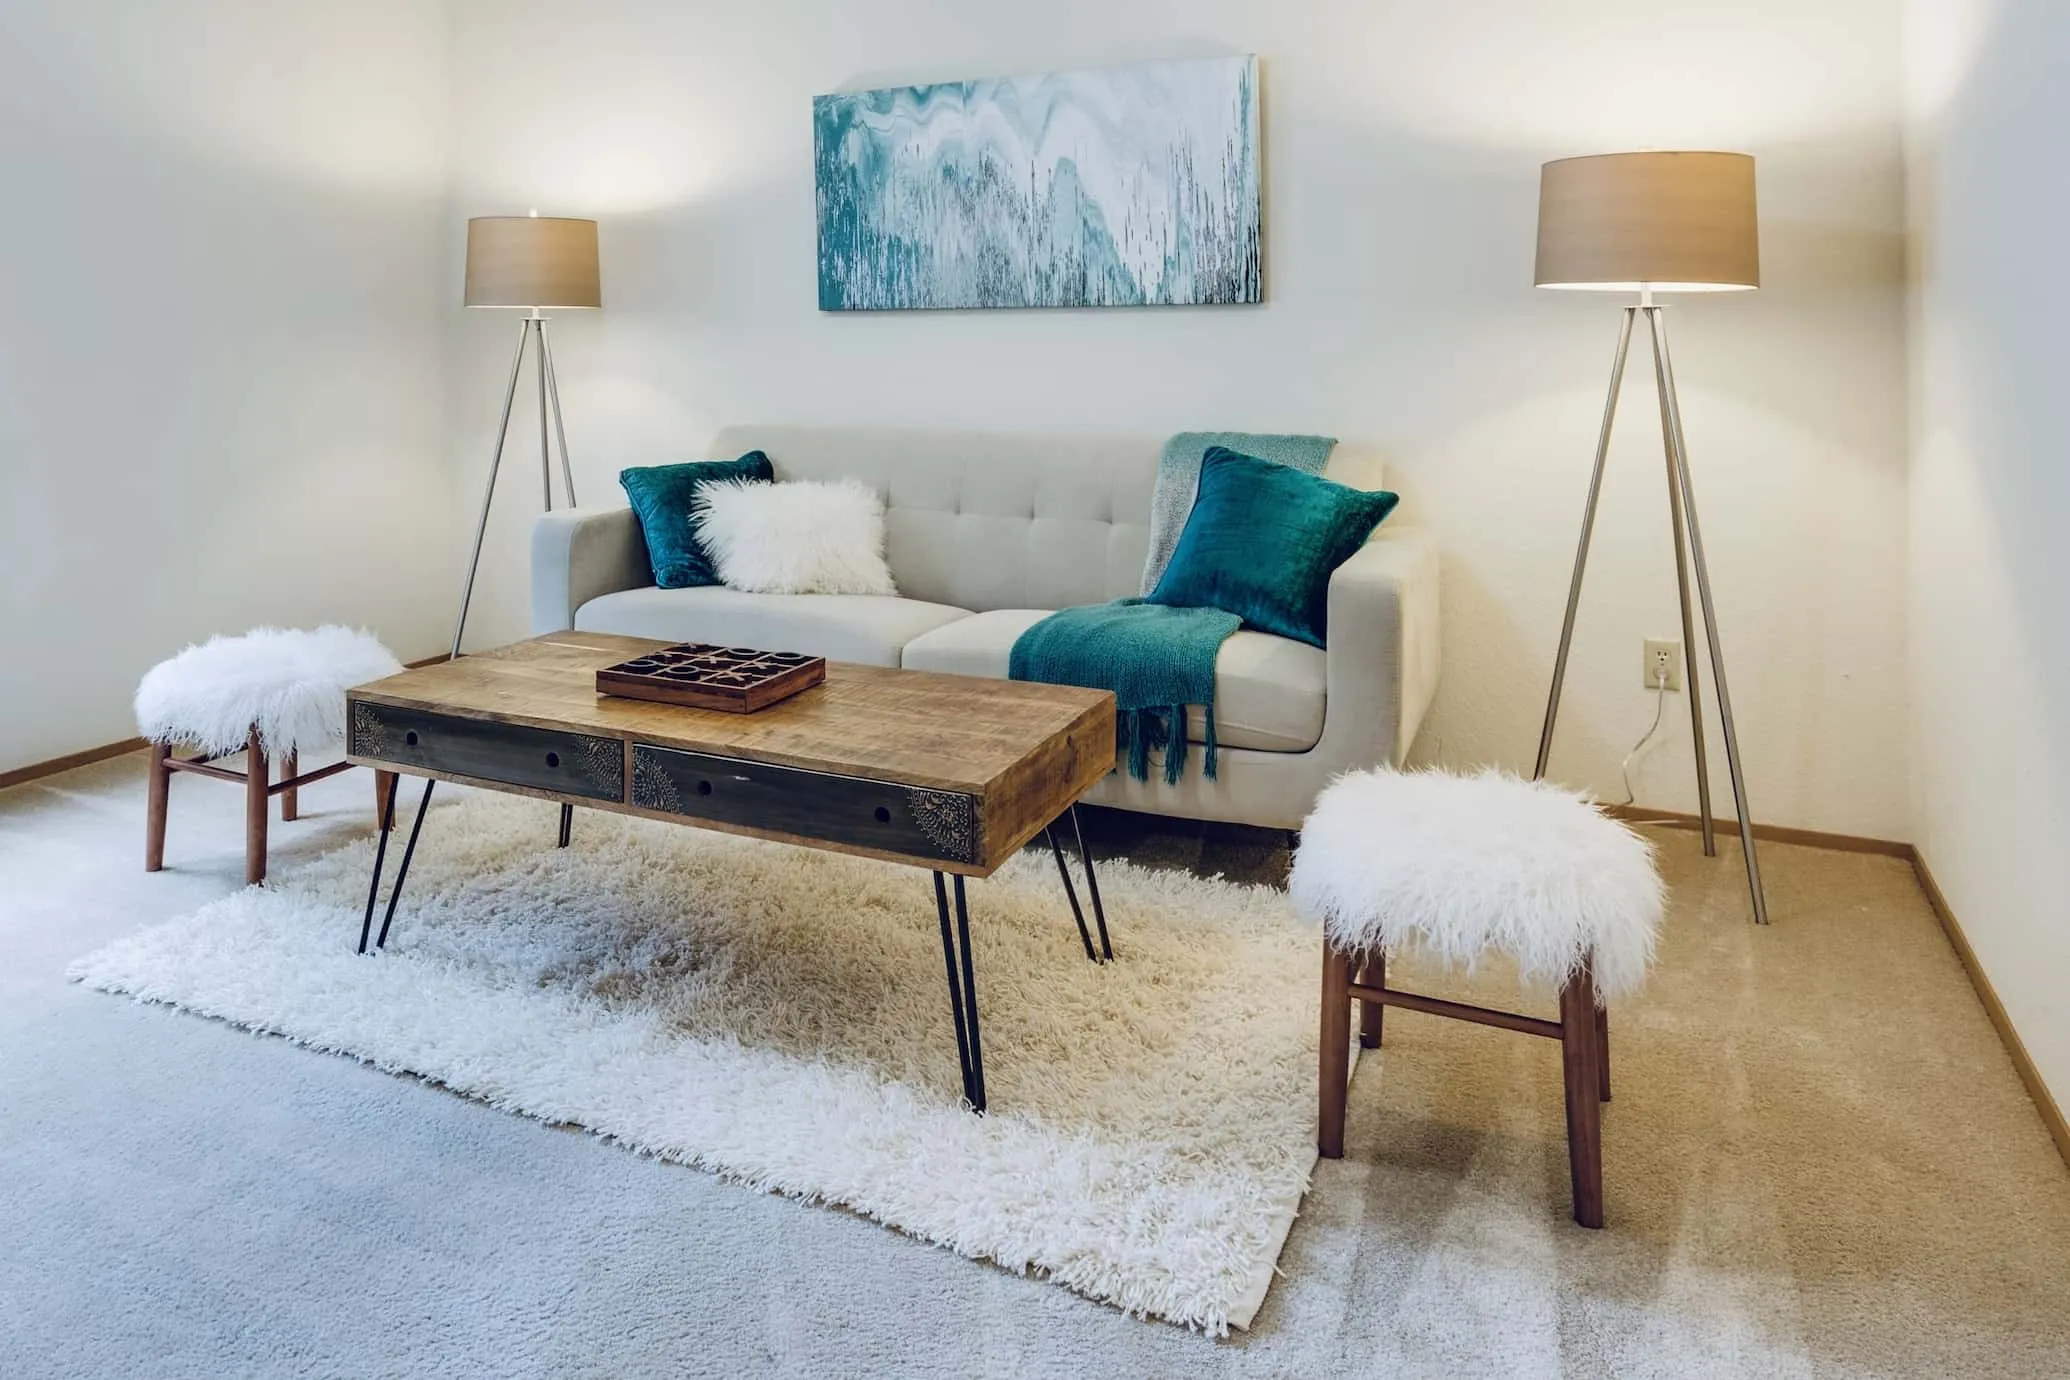 reclaimed wood centrepiece, with metal legs, rugged carpet, grey sofa, white and aqua green cushions, long lamps with rustic touch, rugged cushioned stool with sleek wooden legs, white walls, painting on the wall, minimal vintage style decor